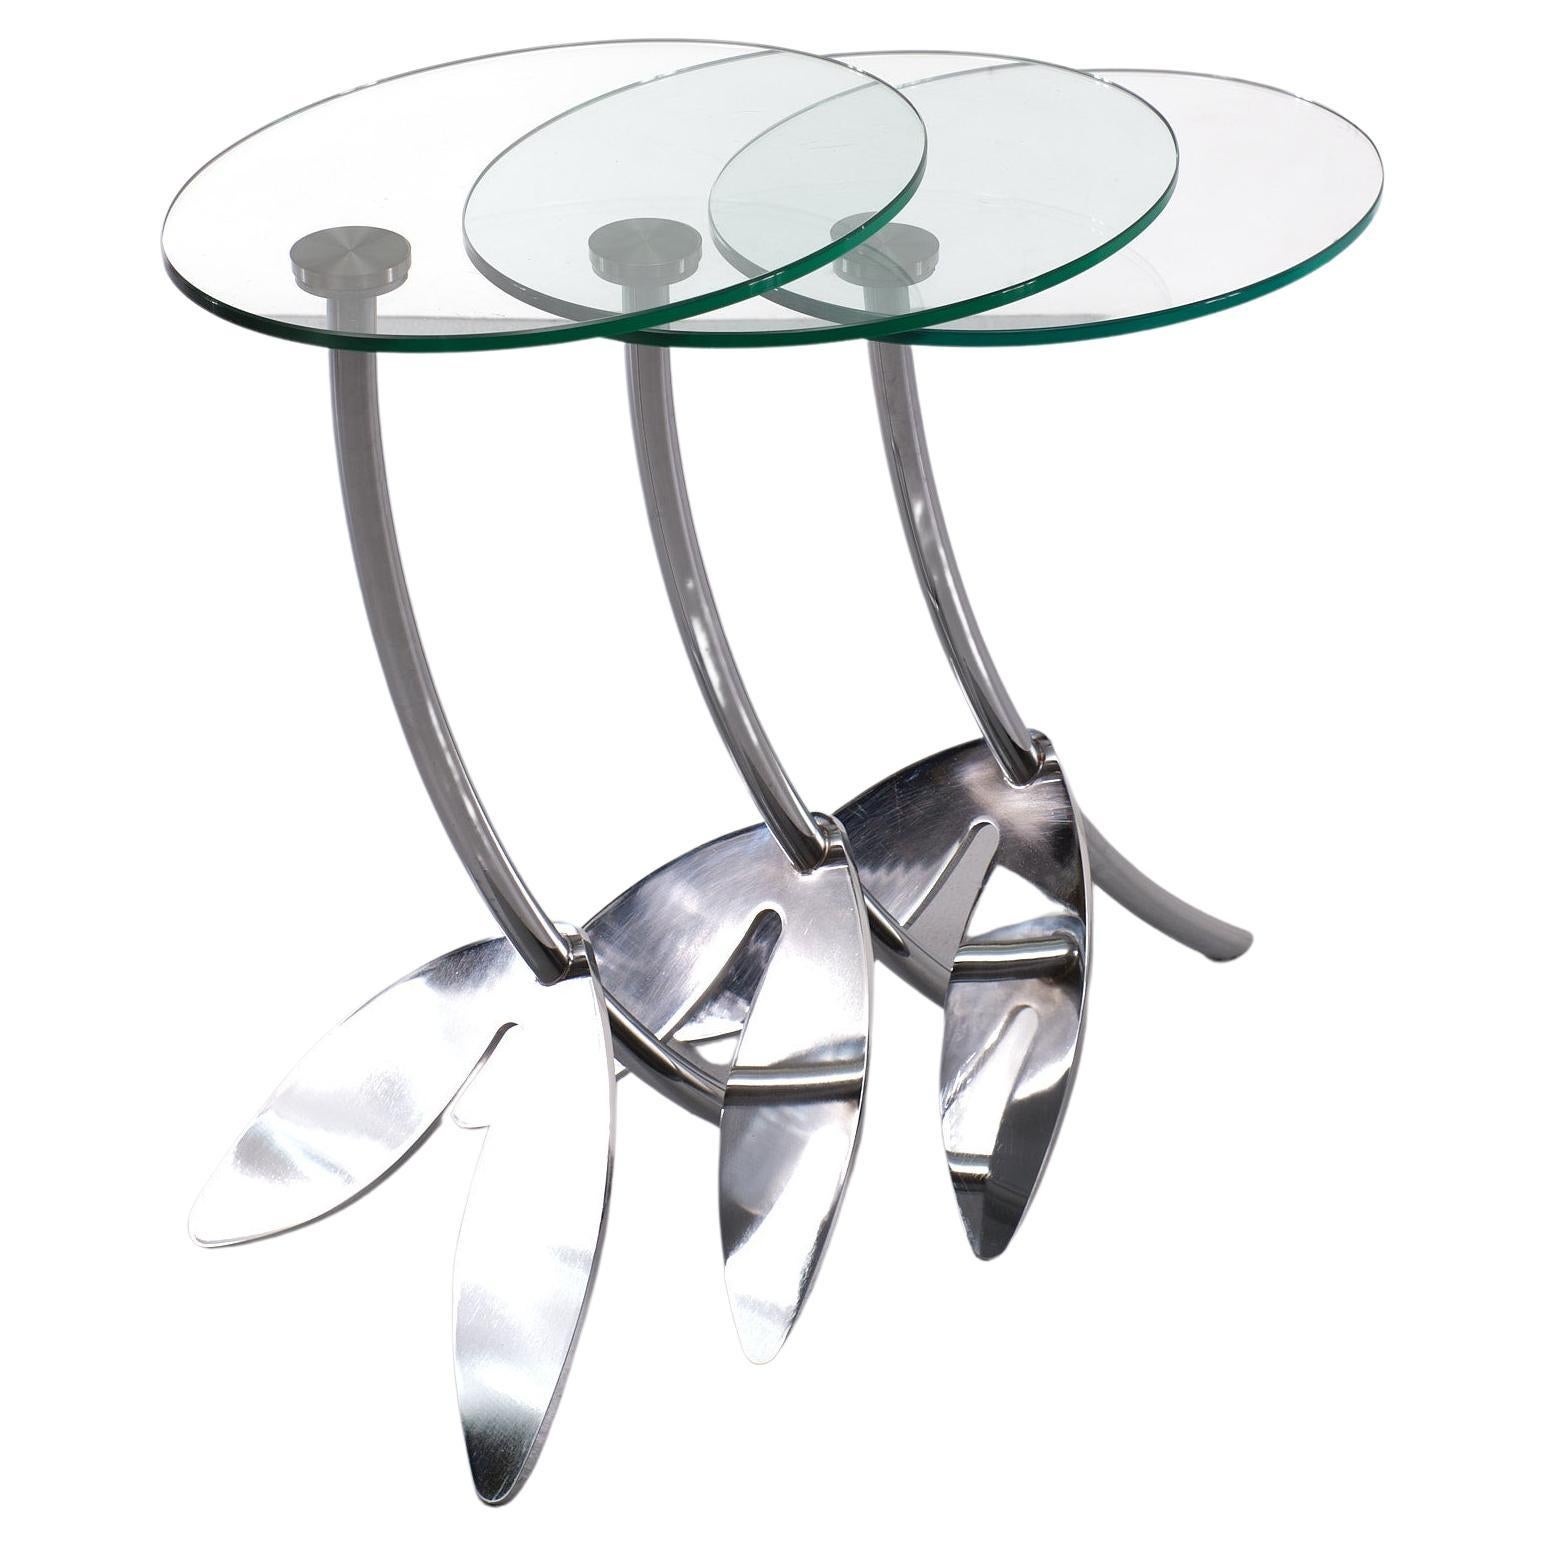 Superb set of Nesting tables Made by Dutch quality firm Metaform Design by Thomas Althaus Model ''Papillon '' Oval Clear hardened glass top comes with a chrome on Steel frame Beautiful organic shape.
LH 68 cm W 43 cm D 31 cm, MH 62 cm, W43 cm, D 31